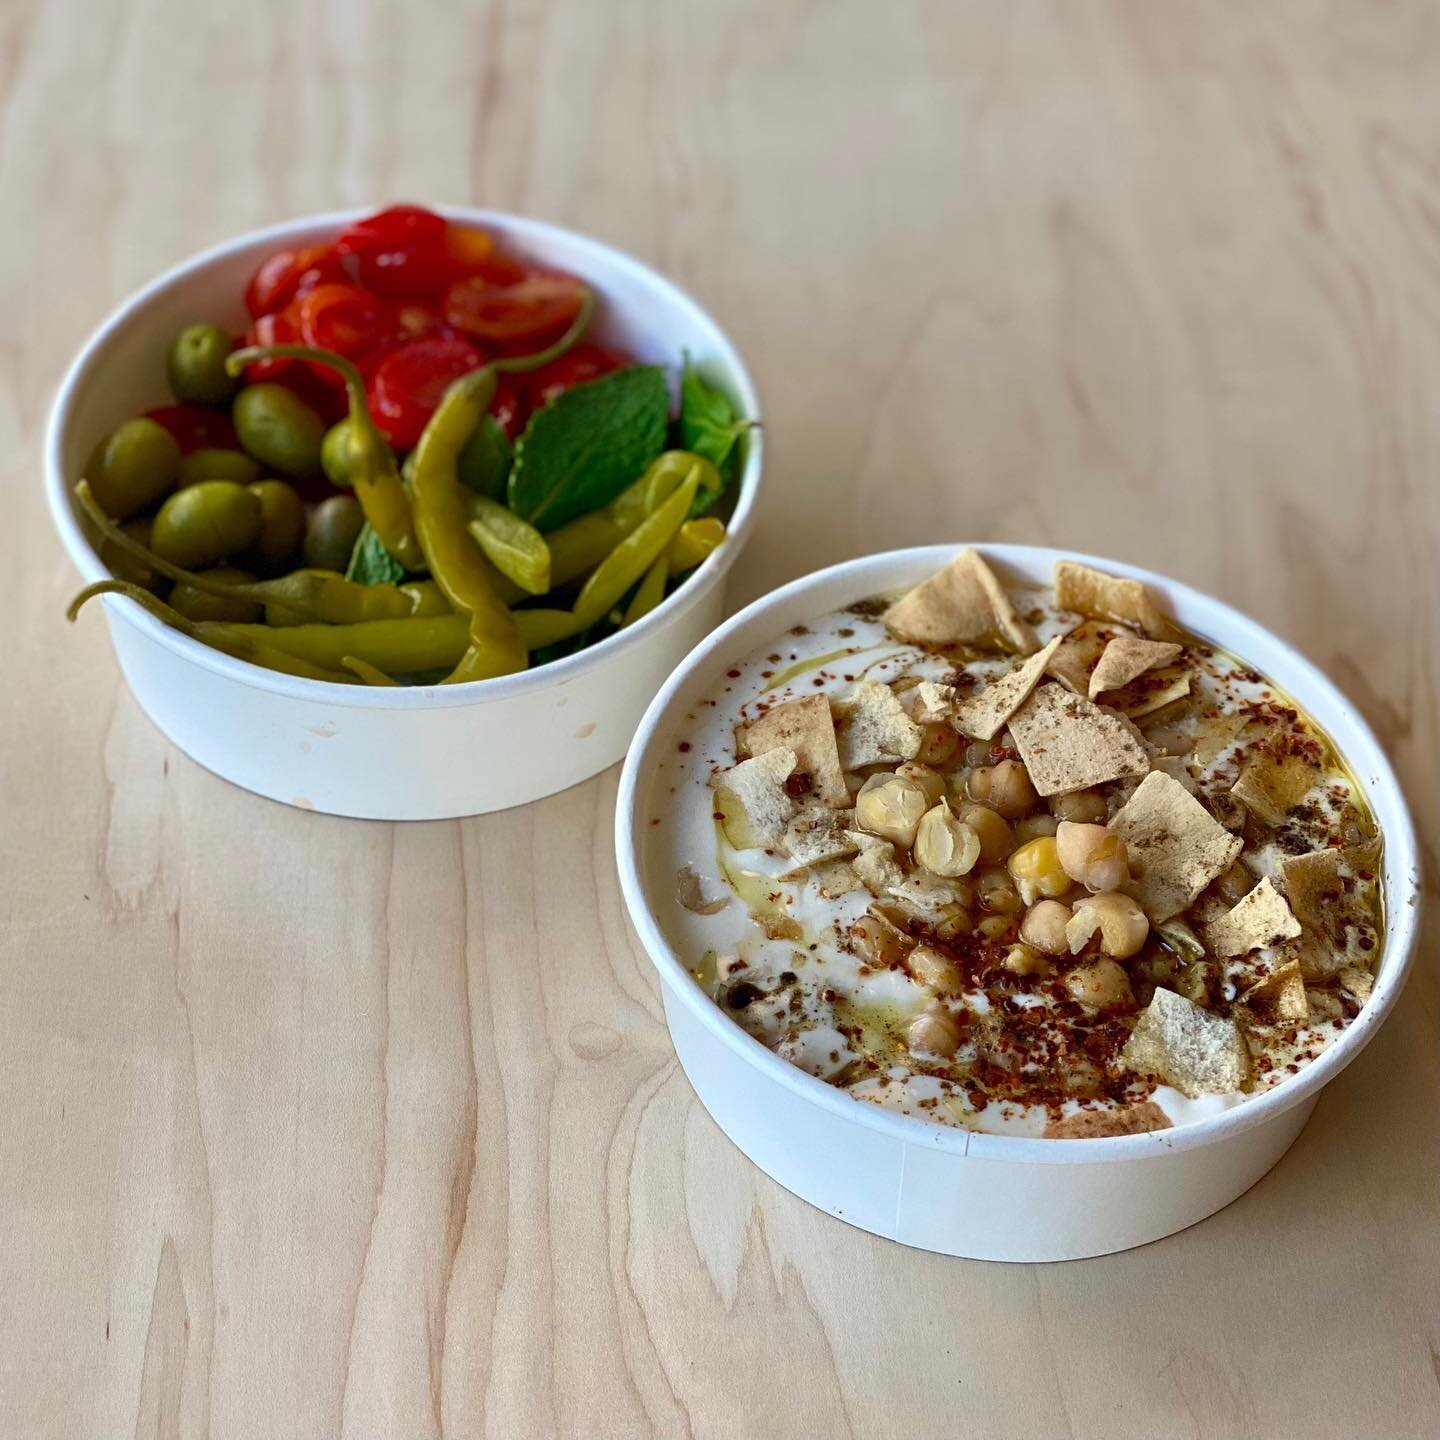 Do you know what you're having for lunch today? Wait, let us answer that for you, Hummus Fatteh.⁠⁠
⁠⁠
A mix of chickpeas, garlic, lemon juice, cumin, toasted bread served in yogurt tahini and olive oil. Be careful, you're already starting to drool! O